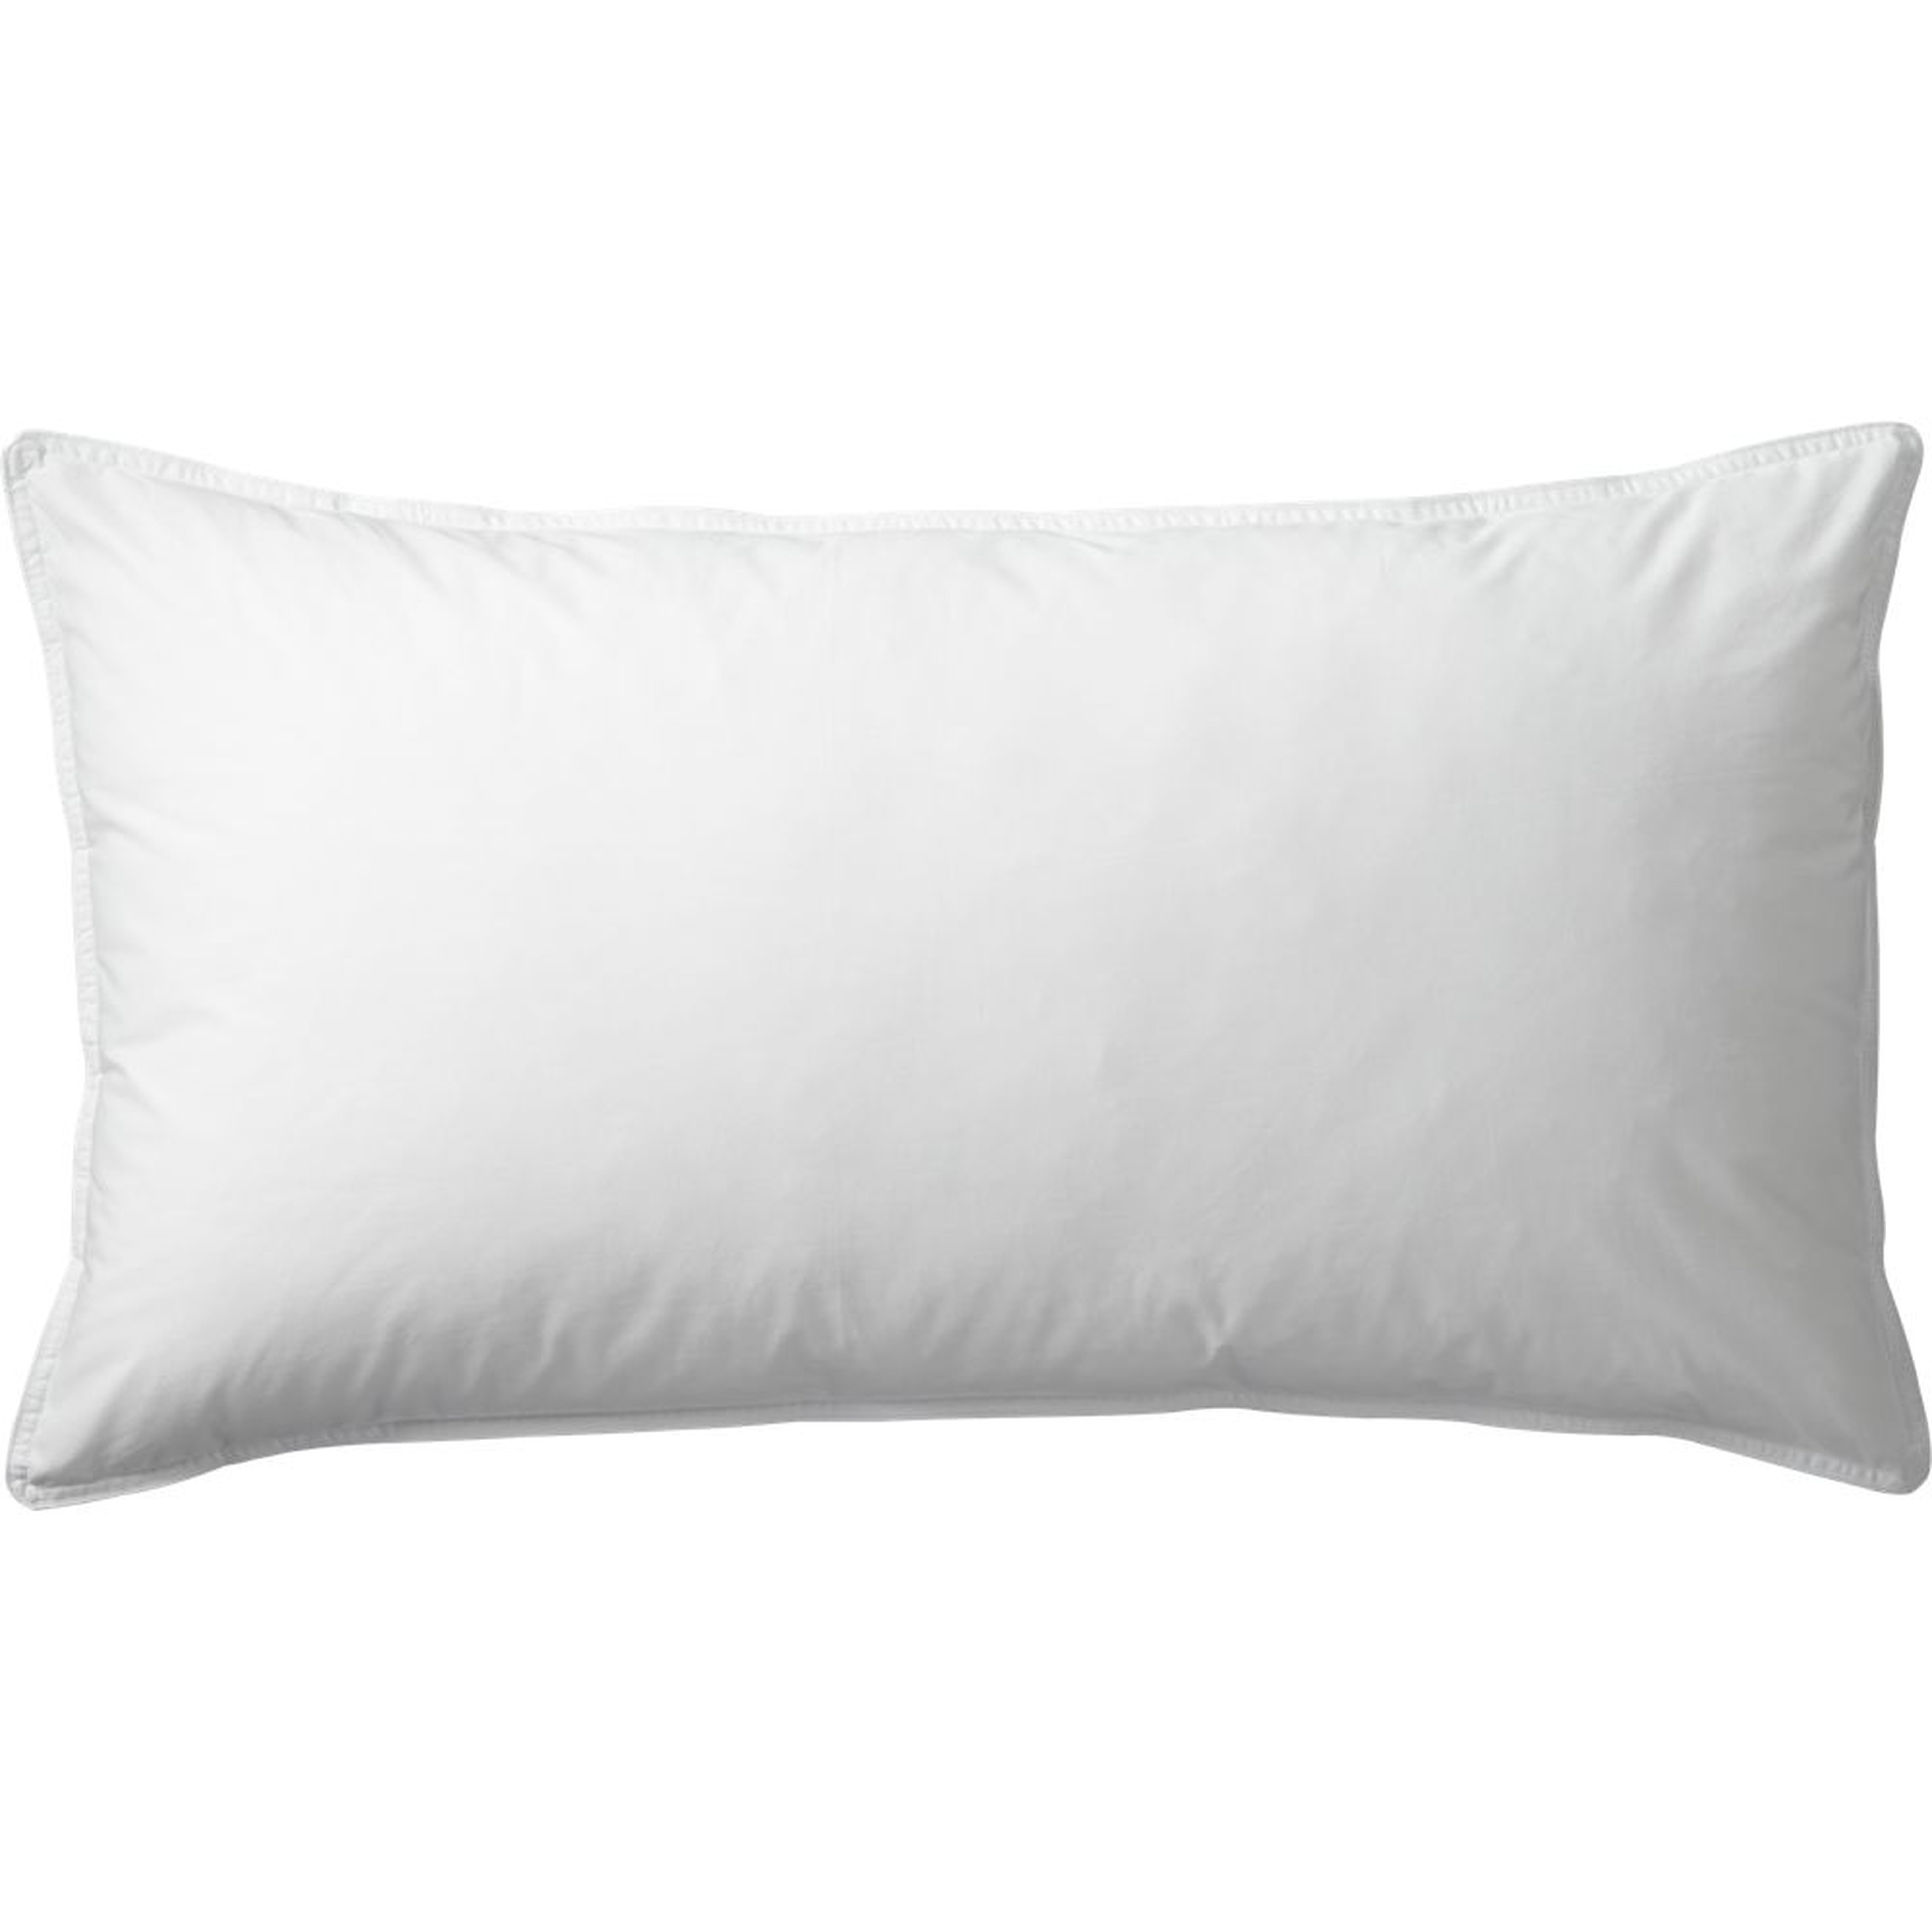 feather-down king pillow insert - CB2